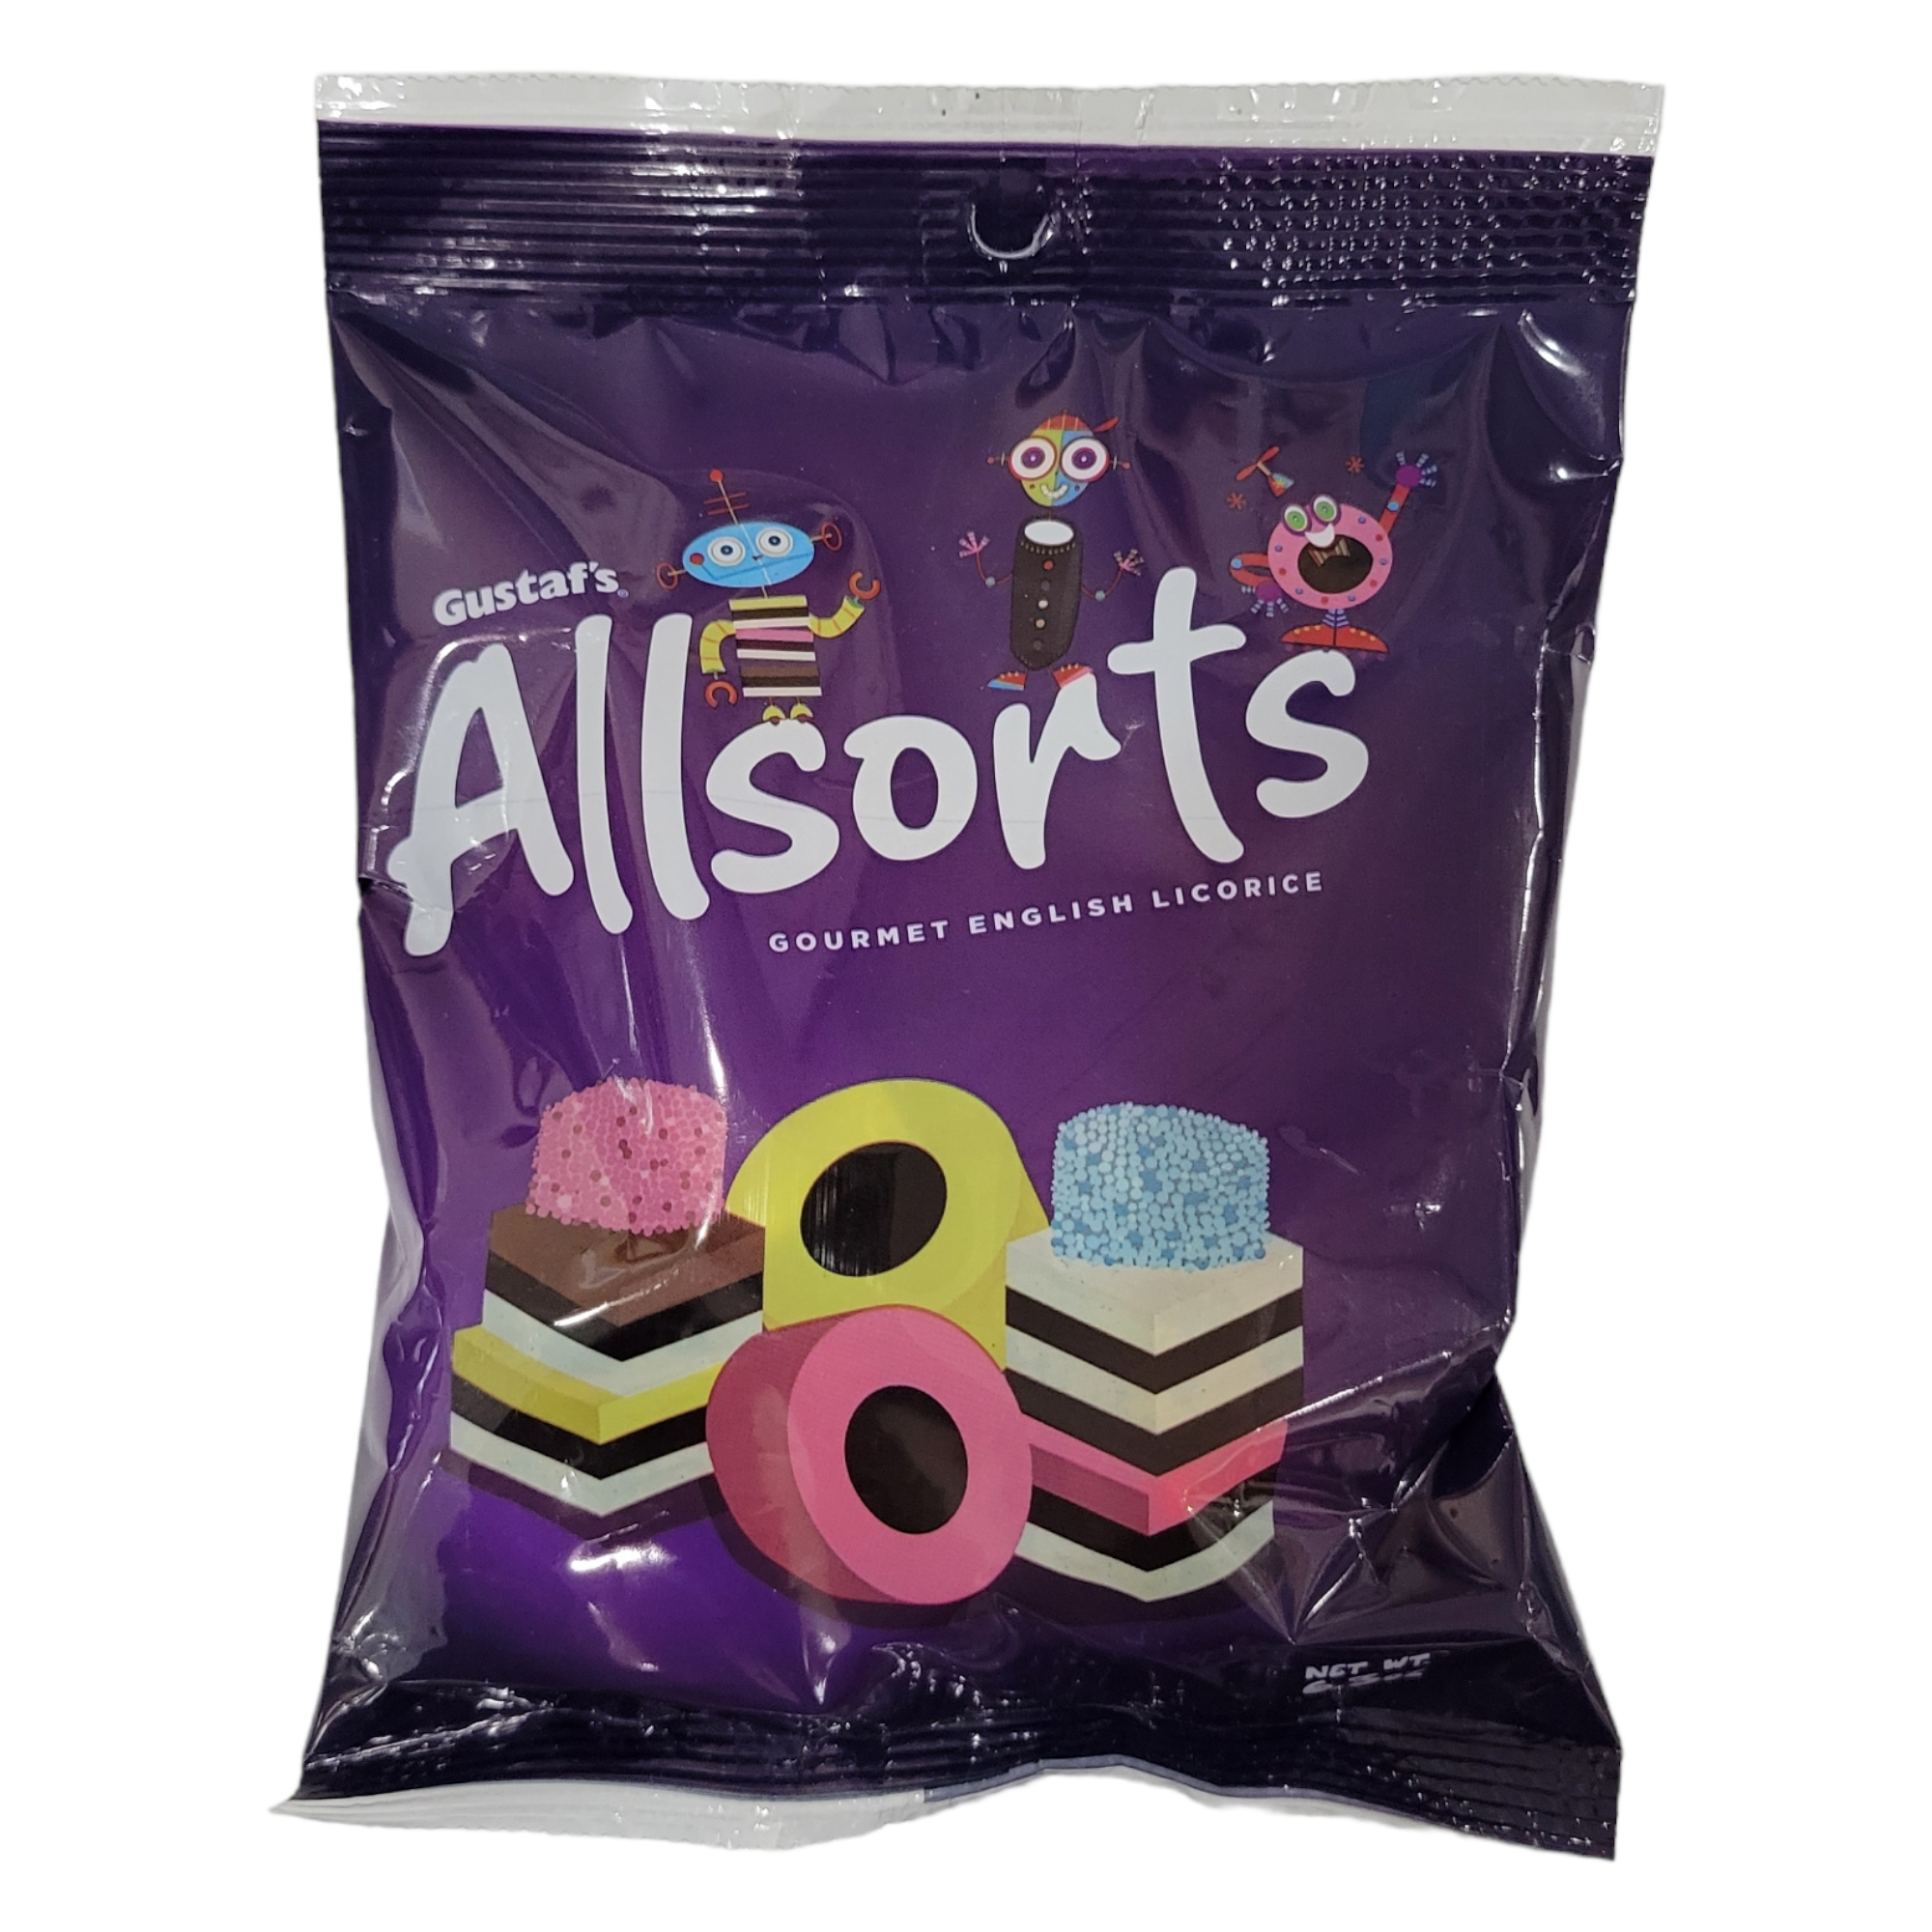 Candy: Gustaf's Allsorts Licorice